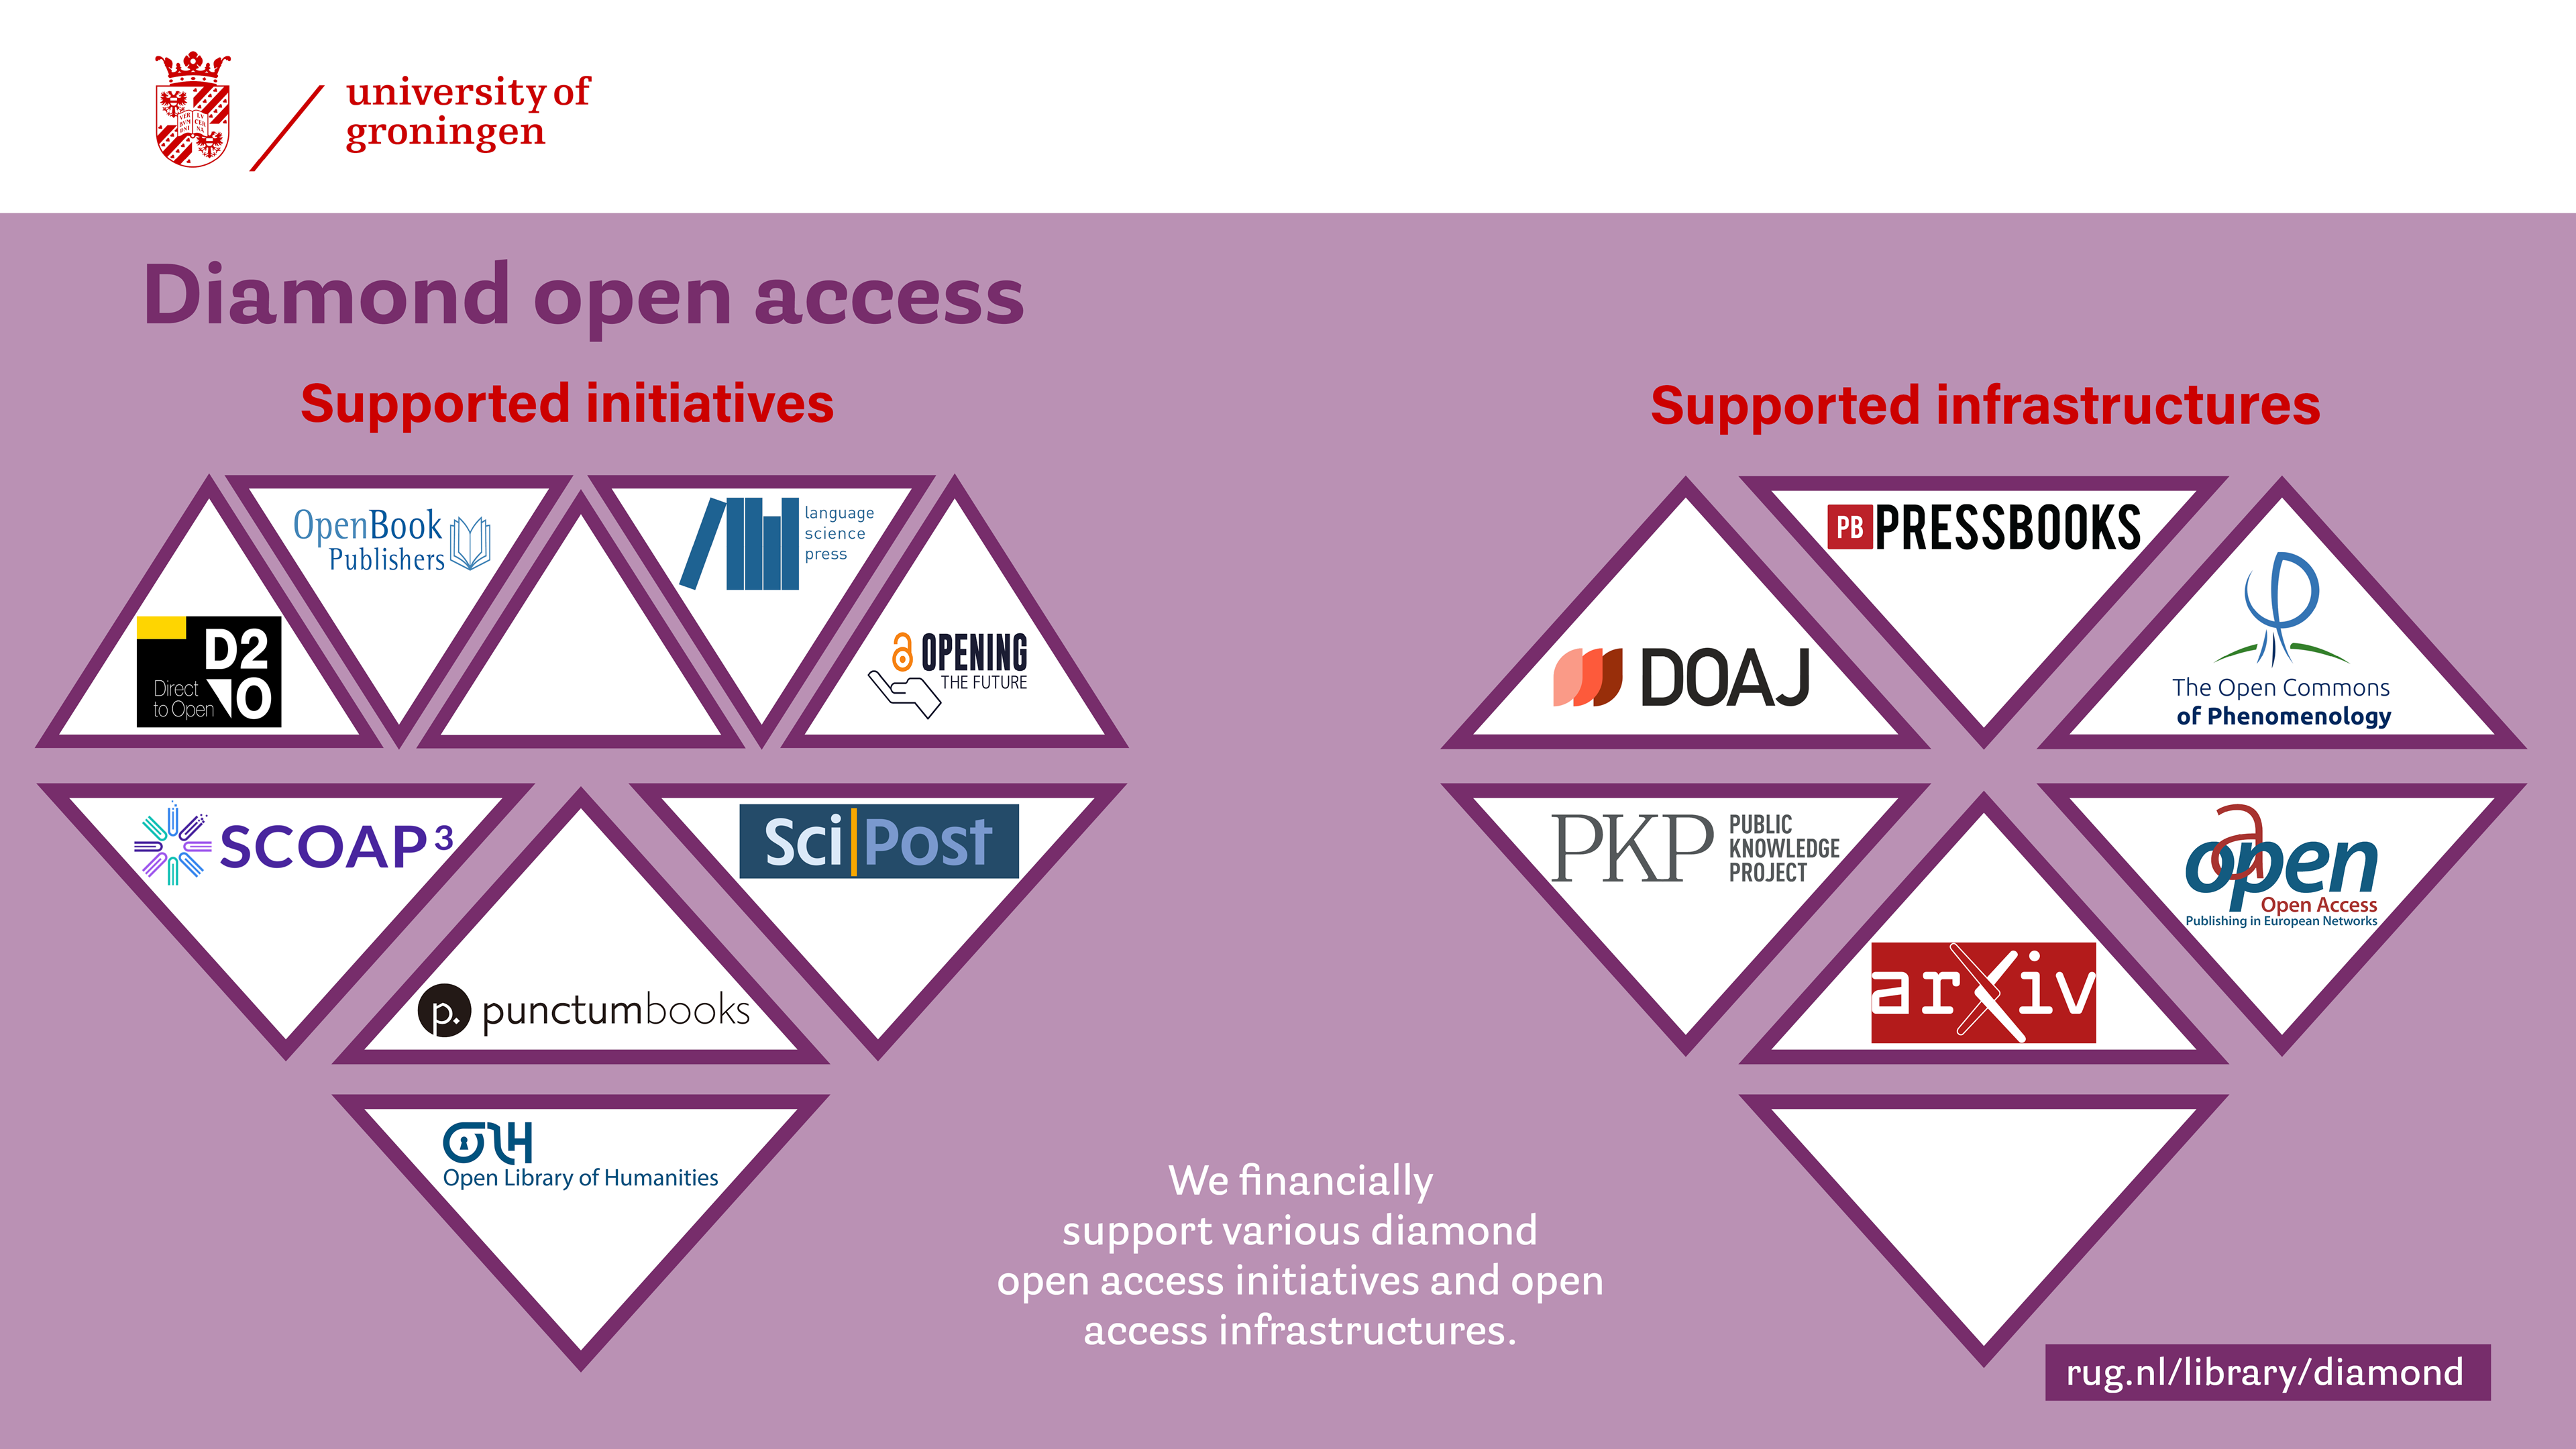 Open access initiatives (Direct to Open, Language Science Press, Open Book Publishers, Open Library of Humanities, Opening the Future, Punctum Books, SCOAP 3, SciPost) and supported infrastructures (ArXiv, DOAJ, OAPEN, Open Commons of Phenomenology, Pressbooks, Public Knowledge Project (PKP))